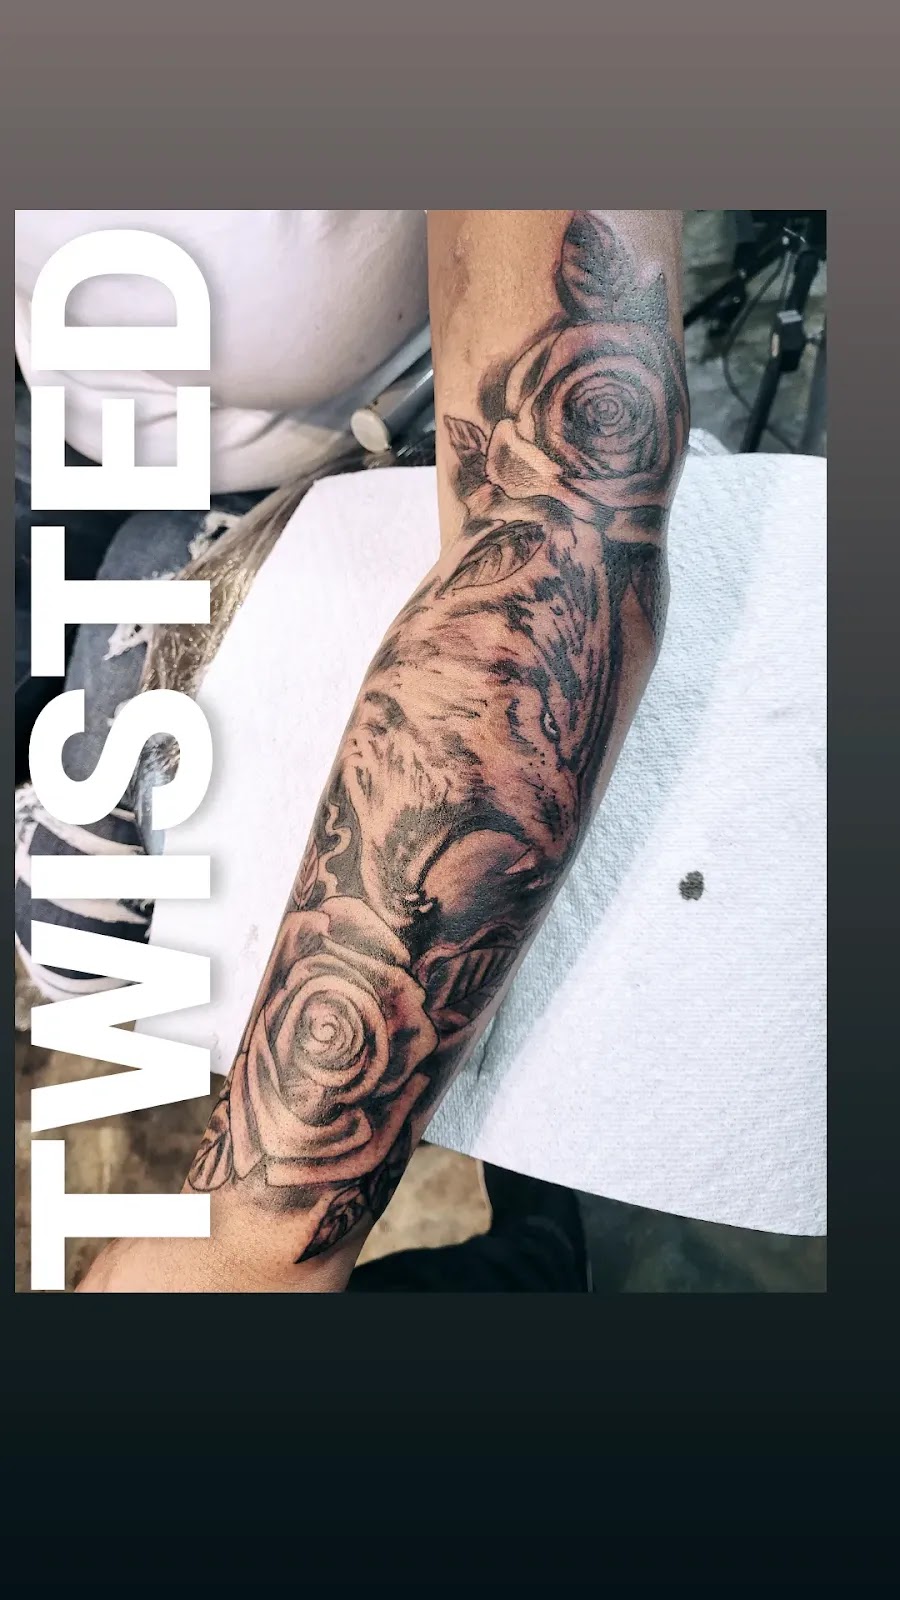 Twisted Tattoo And Piercings | 1226 Broadway, Camden, NJ 08103 | Phone: (856) 635-1300